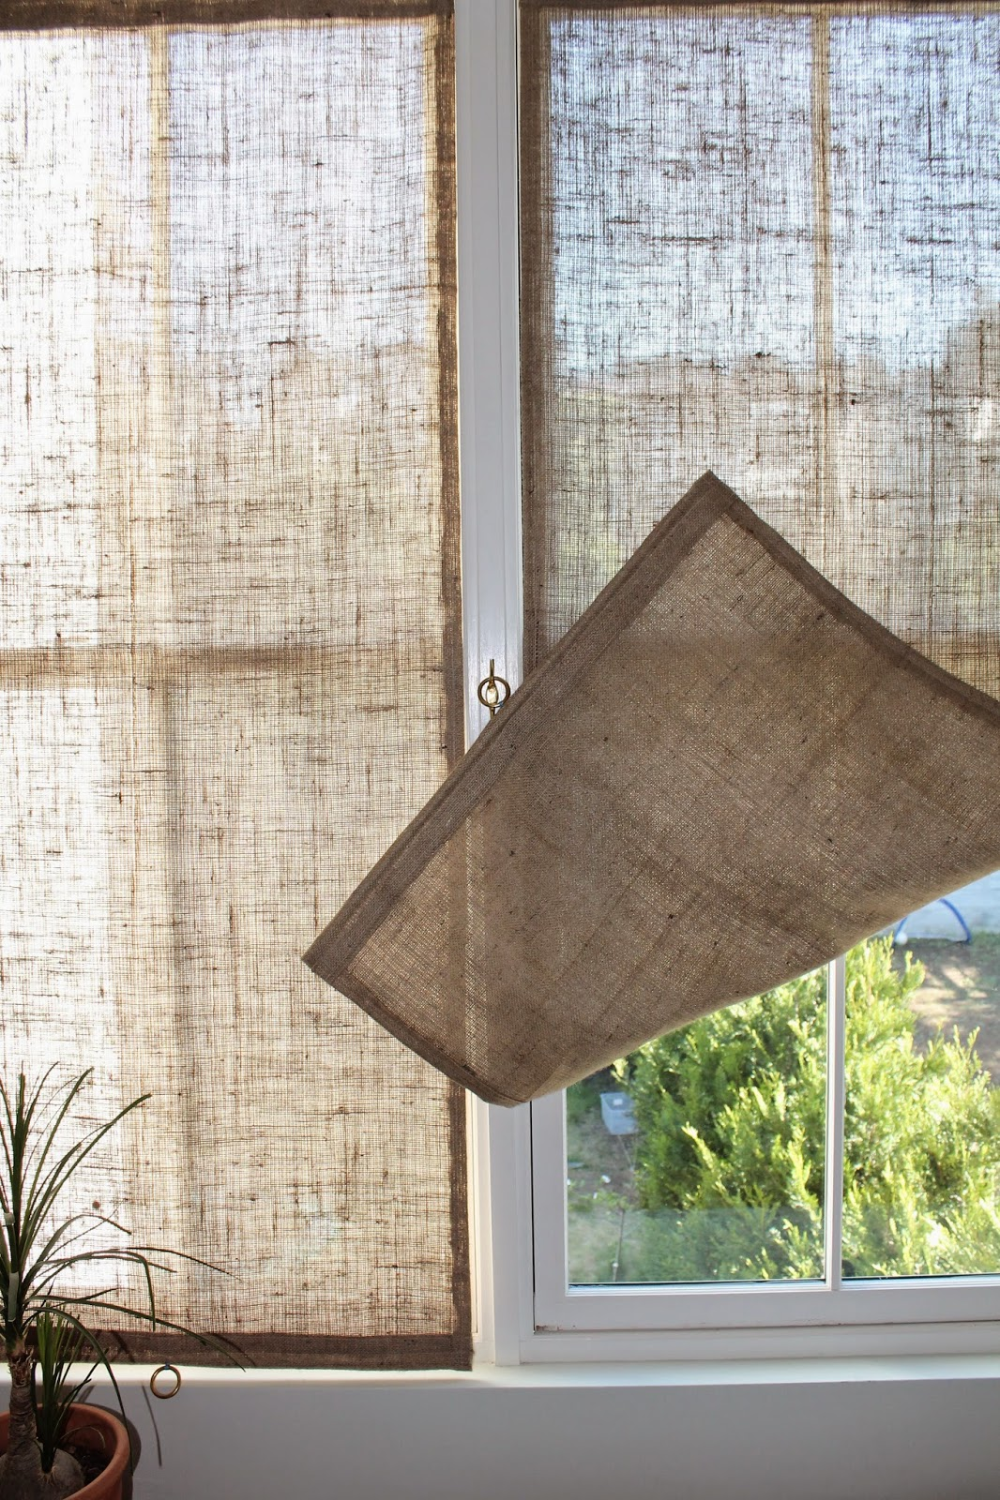 Design your home with burlap curtains